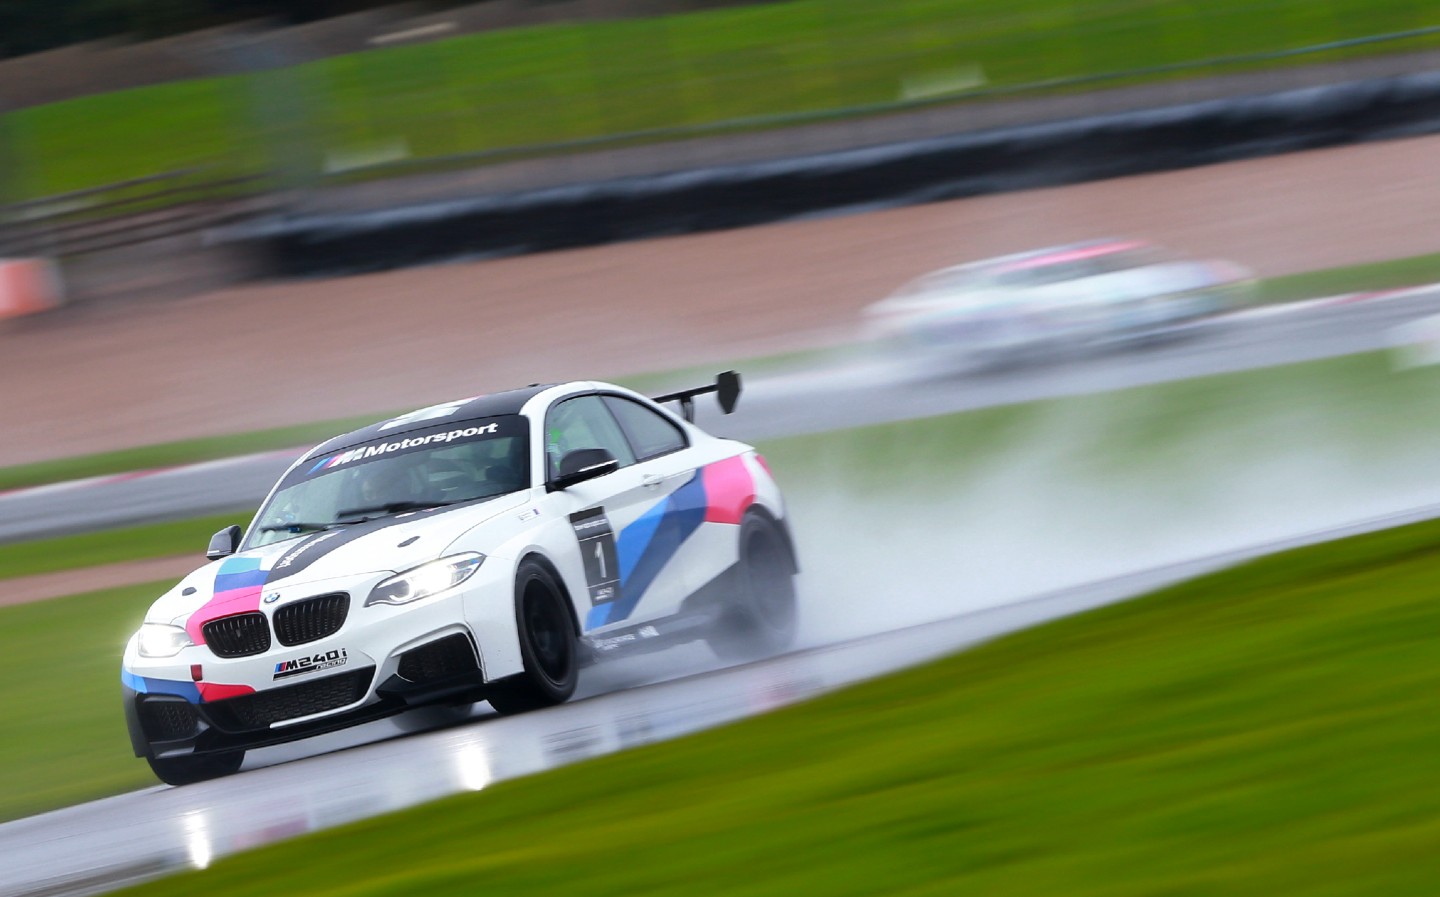 BMW M Driving Experience review by Will Dron for Sunday Times Driving.co.uk - Alex Simms hot laps